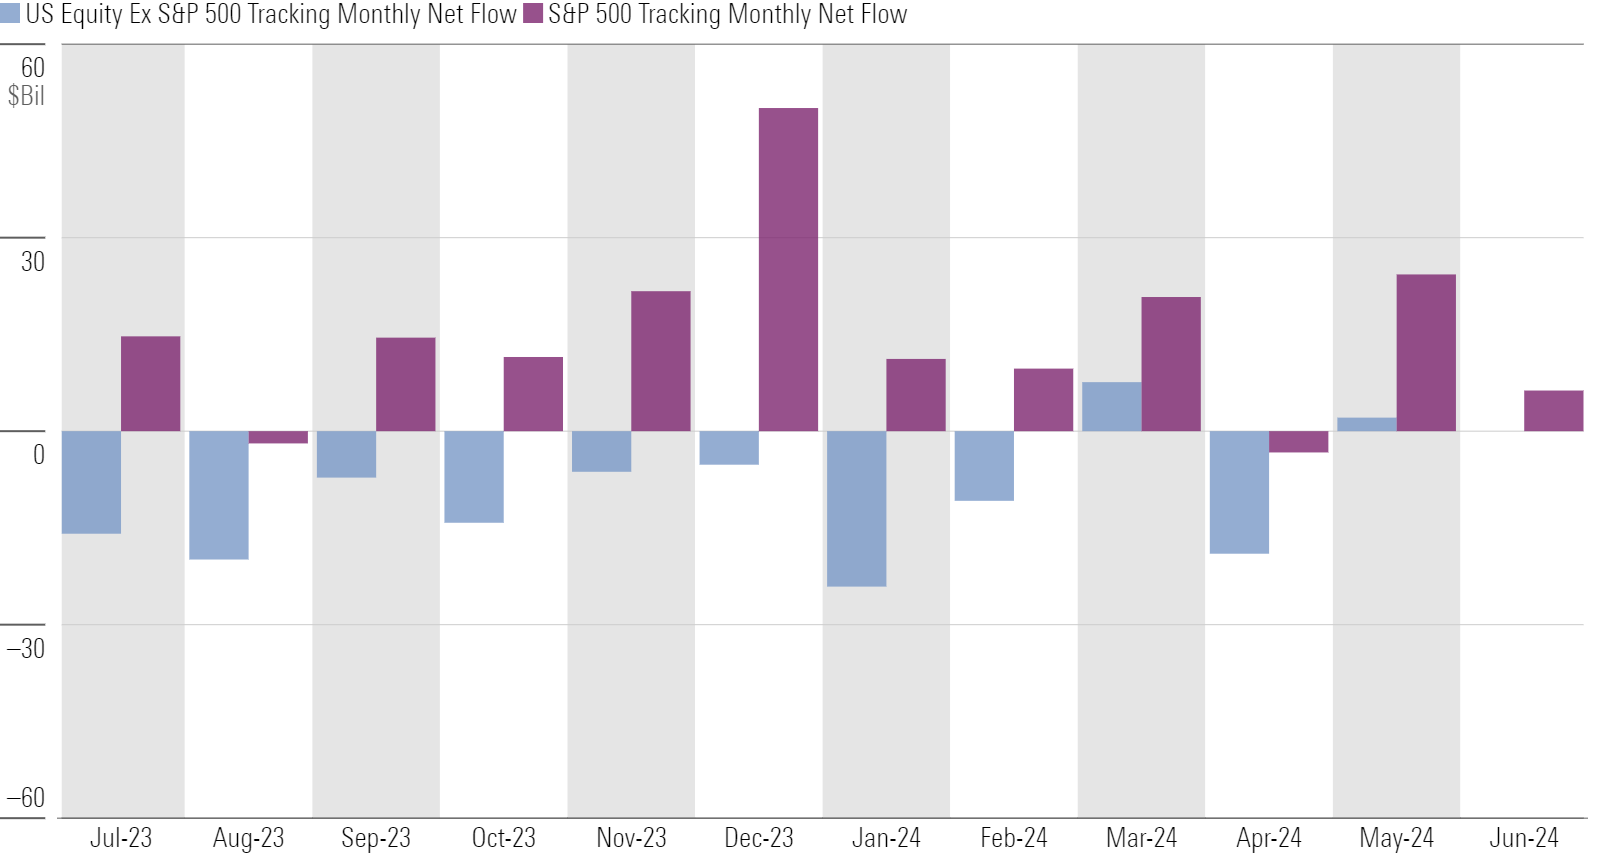 A bar chart comparing flows for S&P 500-tracking funds versus all other US equity funds.